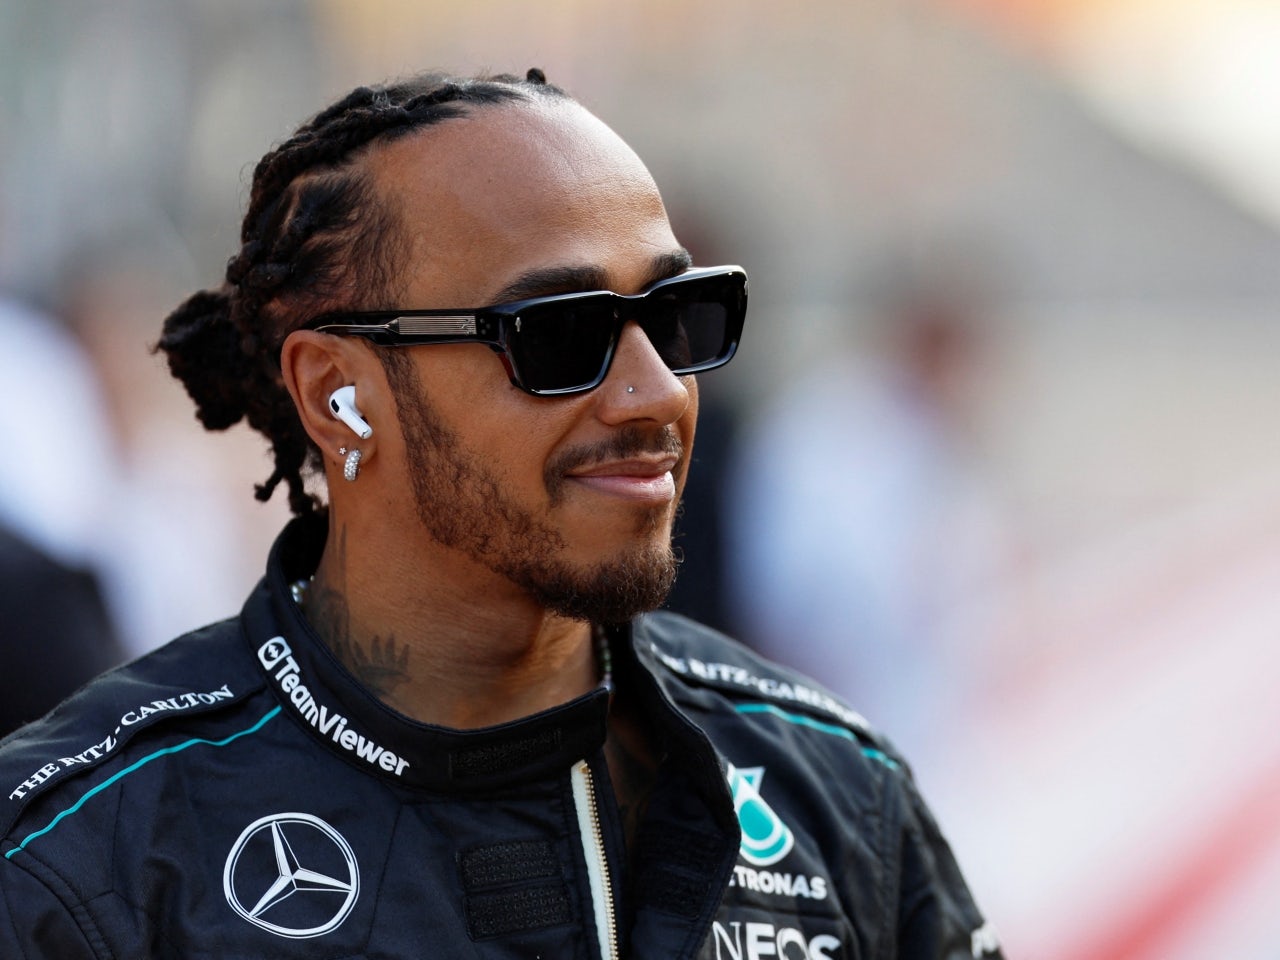 Wolff and Hamilton: Awkward discussion looms over 2025 plans